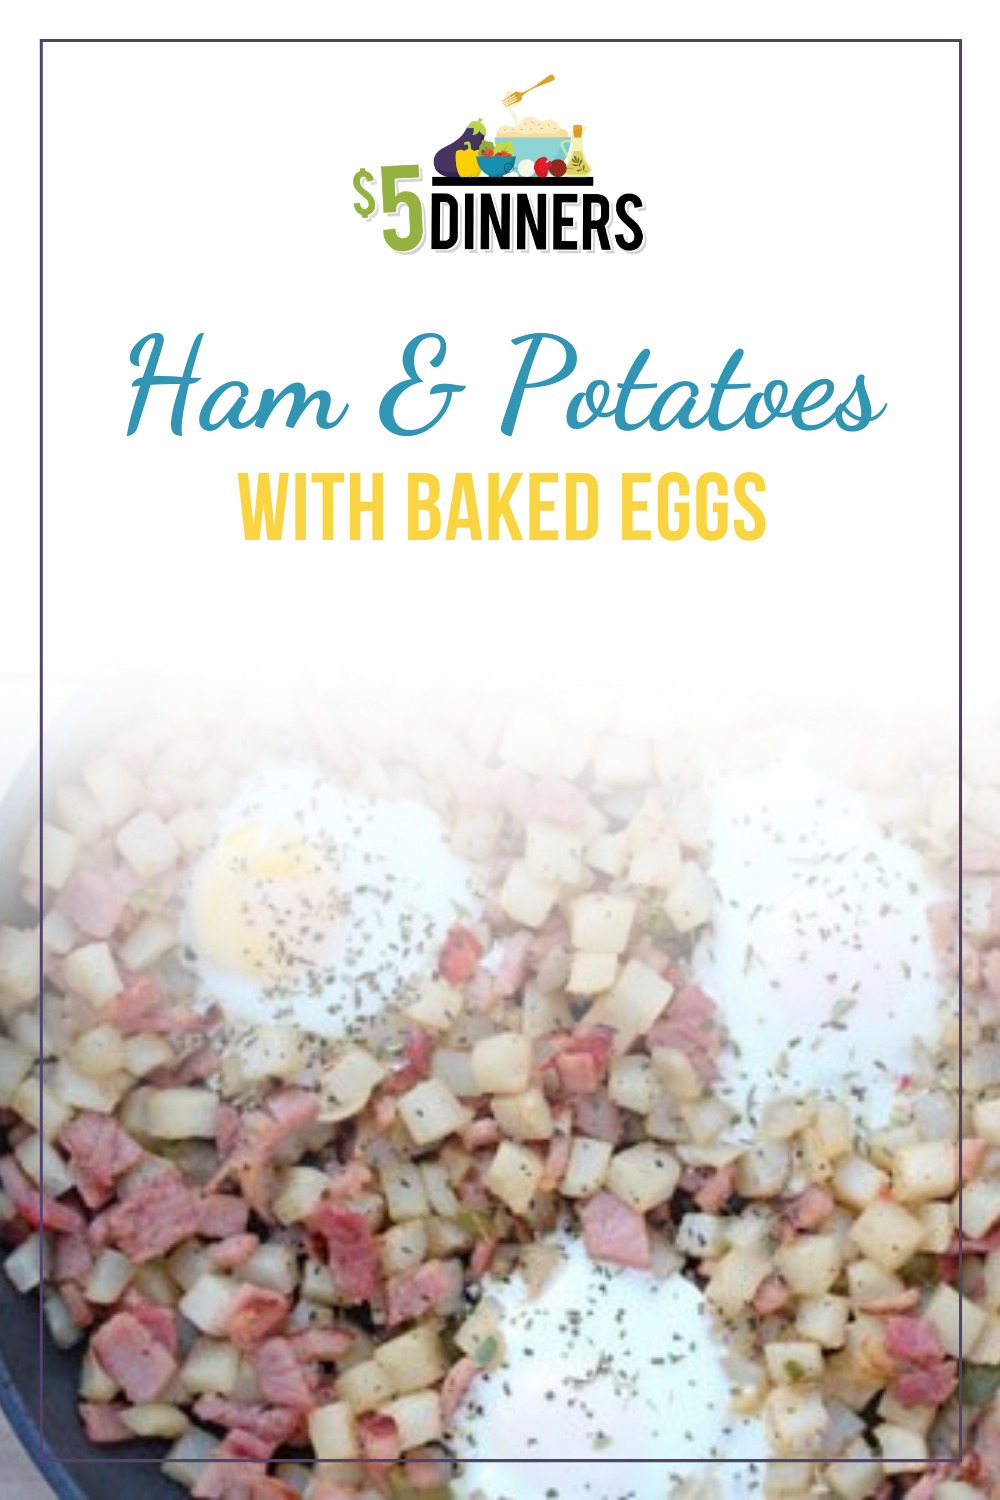 ham & potatoes with baked eggs